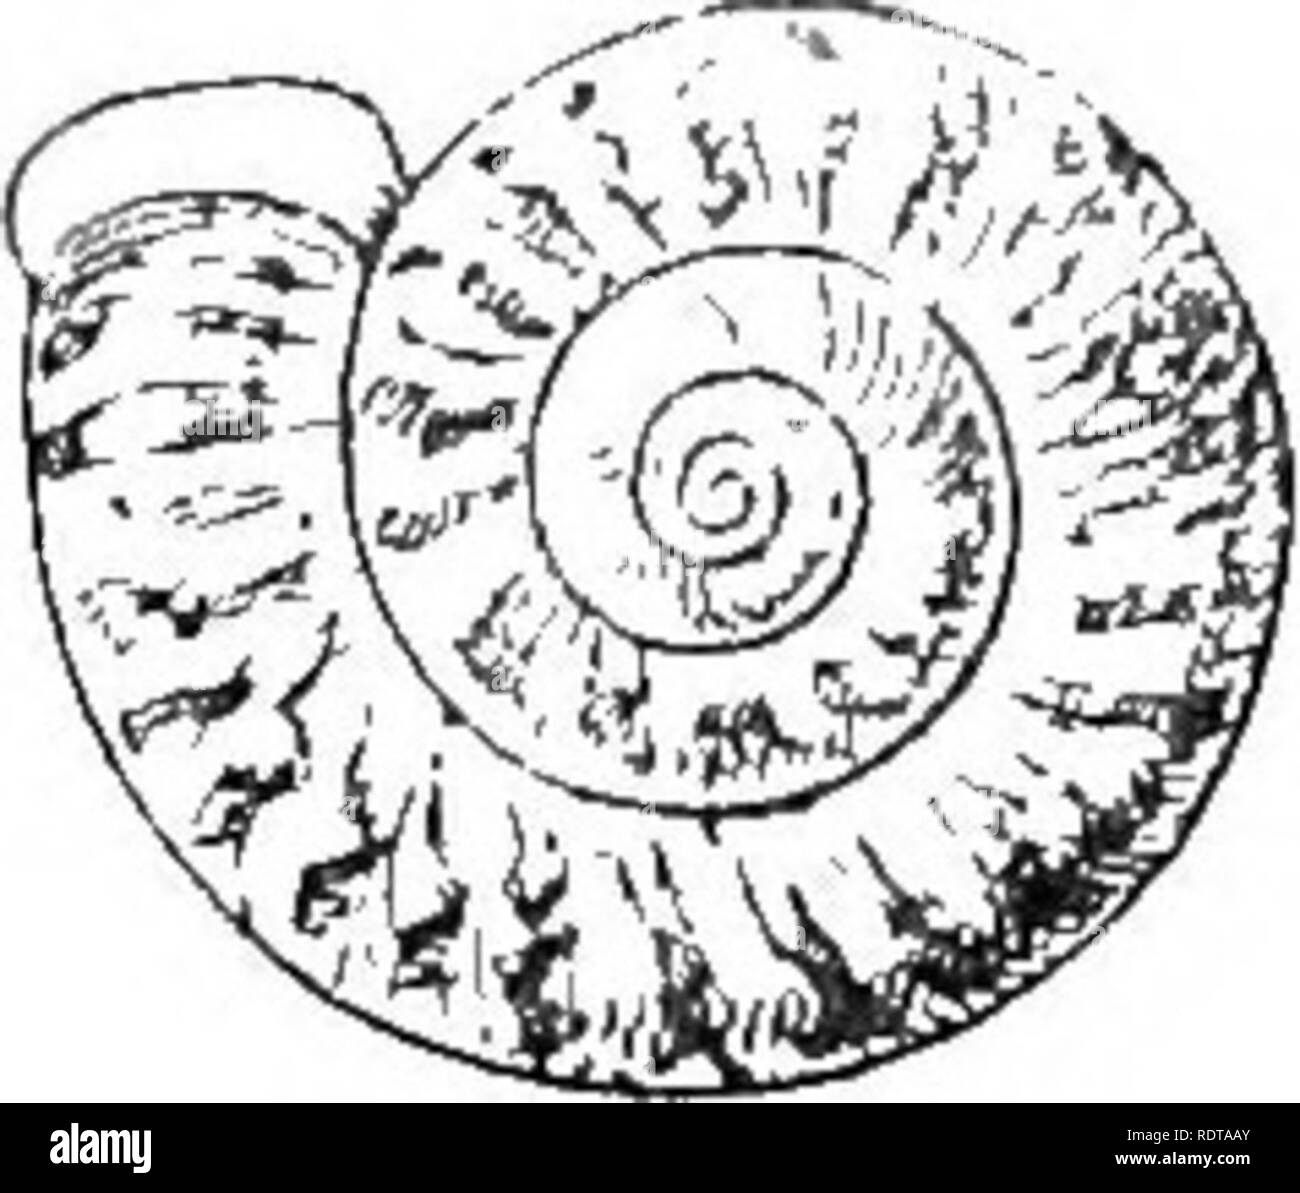 . Mollusca ... Mollusks. 28 OICLOPHOEID^. The author draws special attention to the thick, rough perio- stracum, which forms distant radiating ridges, in addition to the usual spiral striation in many of the species, and states that no other known Ceylon species appears really to approach it. 41. Scabrina calyx, Benson. Cyclophorus calyx, Benson, A. M.N. H. ser. 2, xYii, 1857, p. 228; Theobald, J. A. S. B. xxvi, 1857, p. 247; Pfeifier, Mon. Pneum. Suppl. 1, 1»58, p. 56; id., Novit. Conch, ser. 1, ii, 1860, p. 145, pi. 37, figs. 25 -27 ; lleeve, Conch. Icon, xiii, 1861, Cyclophorus, pi. 20, tig Stock Photo